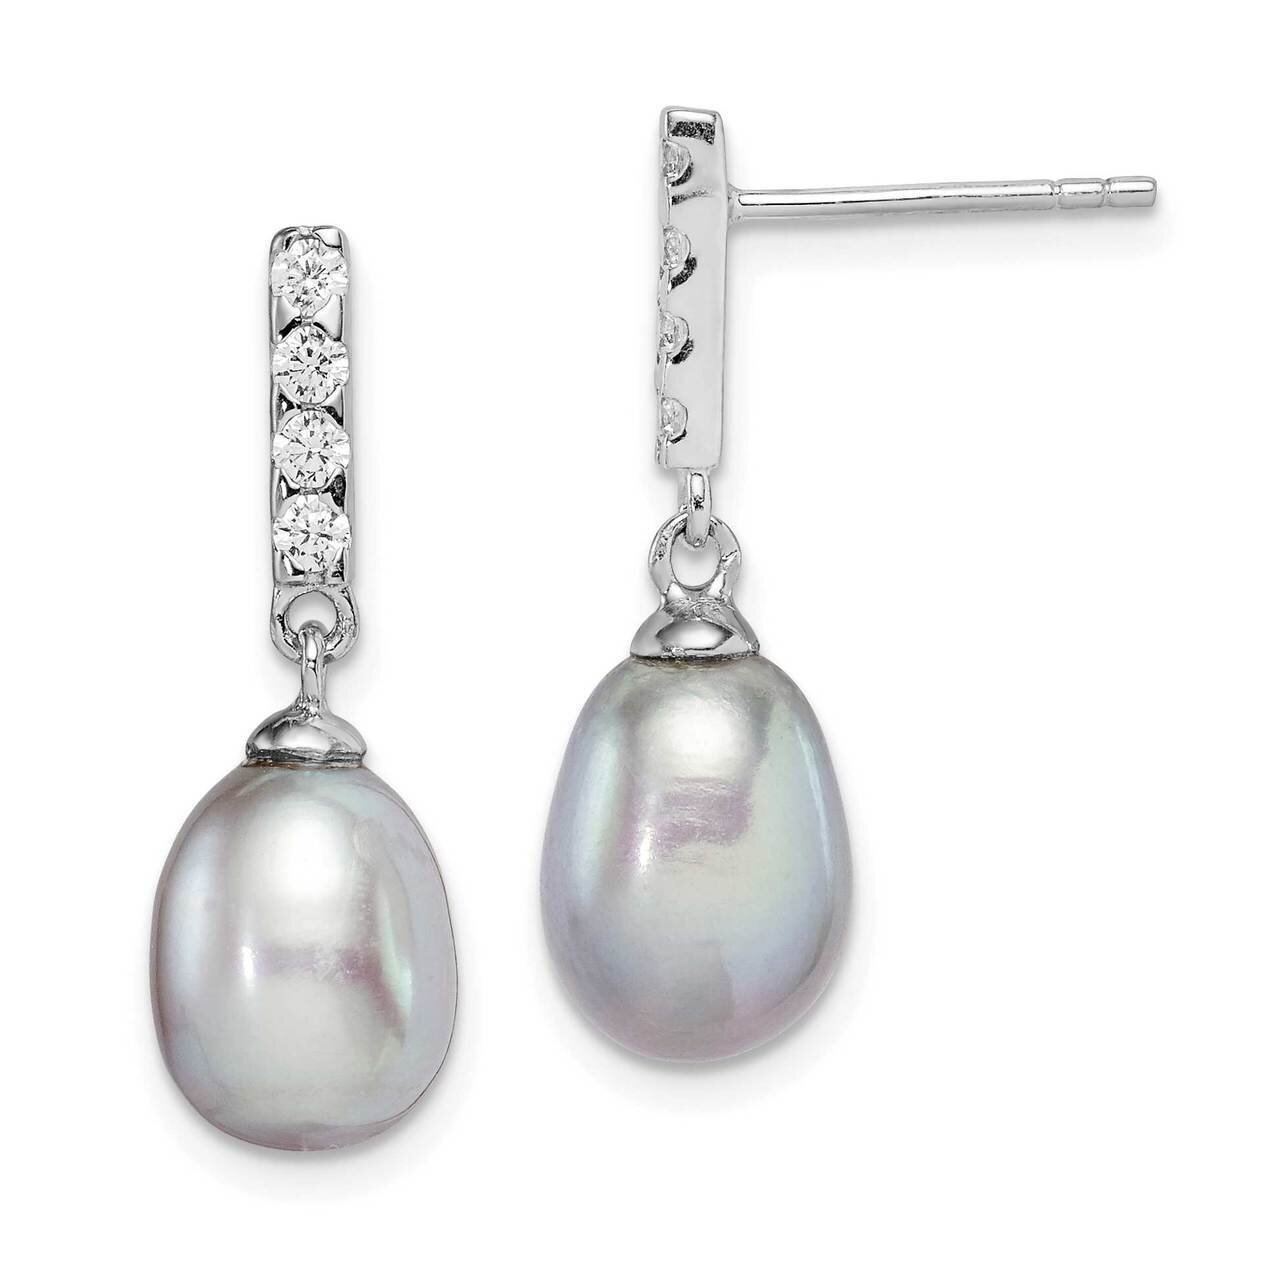 8-9mm Grey Freshwater Cultured Pearl CZ Diamond Post Dangle Earrings Sterling Silver Rhodium Plated QE15359